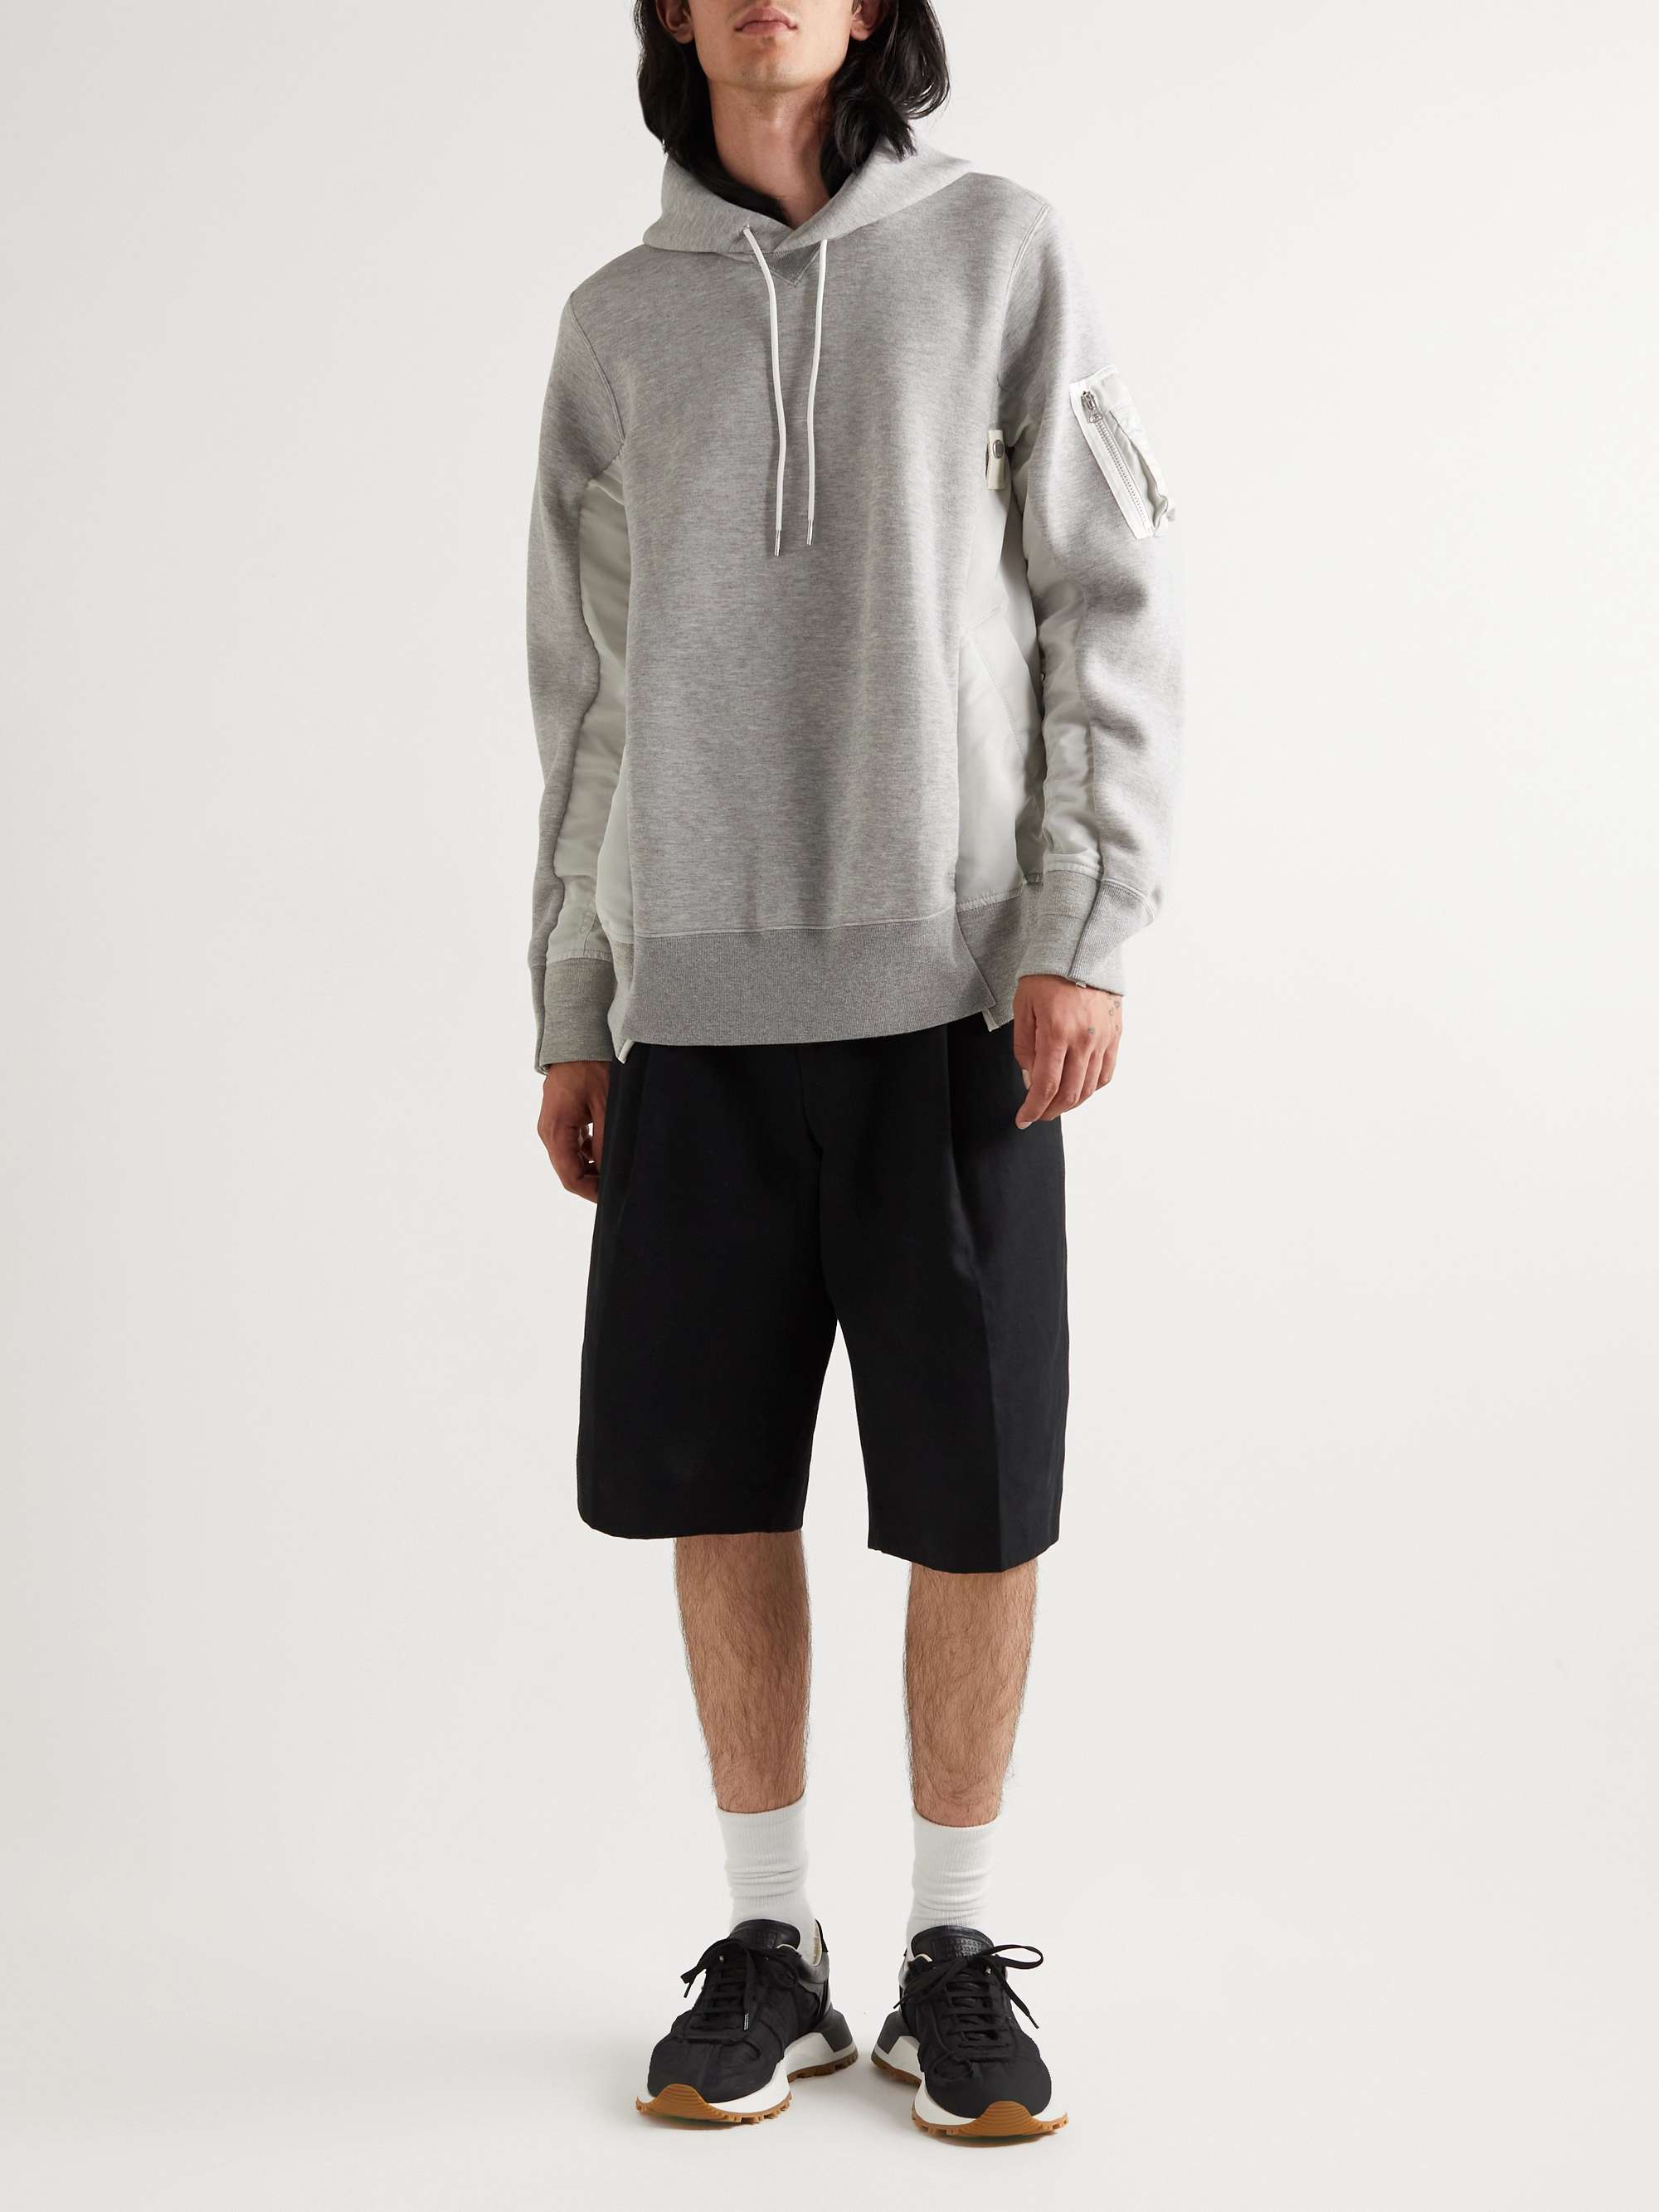 SACAI MA-1 Nylon-Trimmed Cotton-Blend Jersey Hoodie for Men | MR